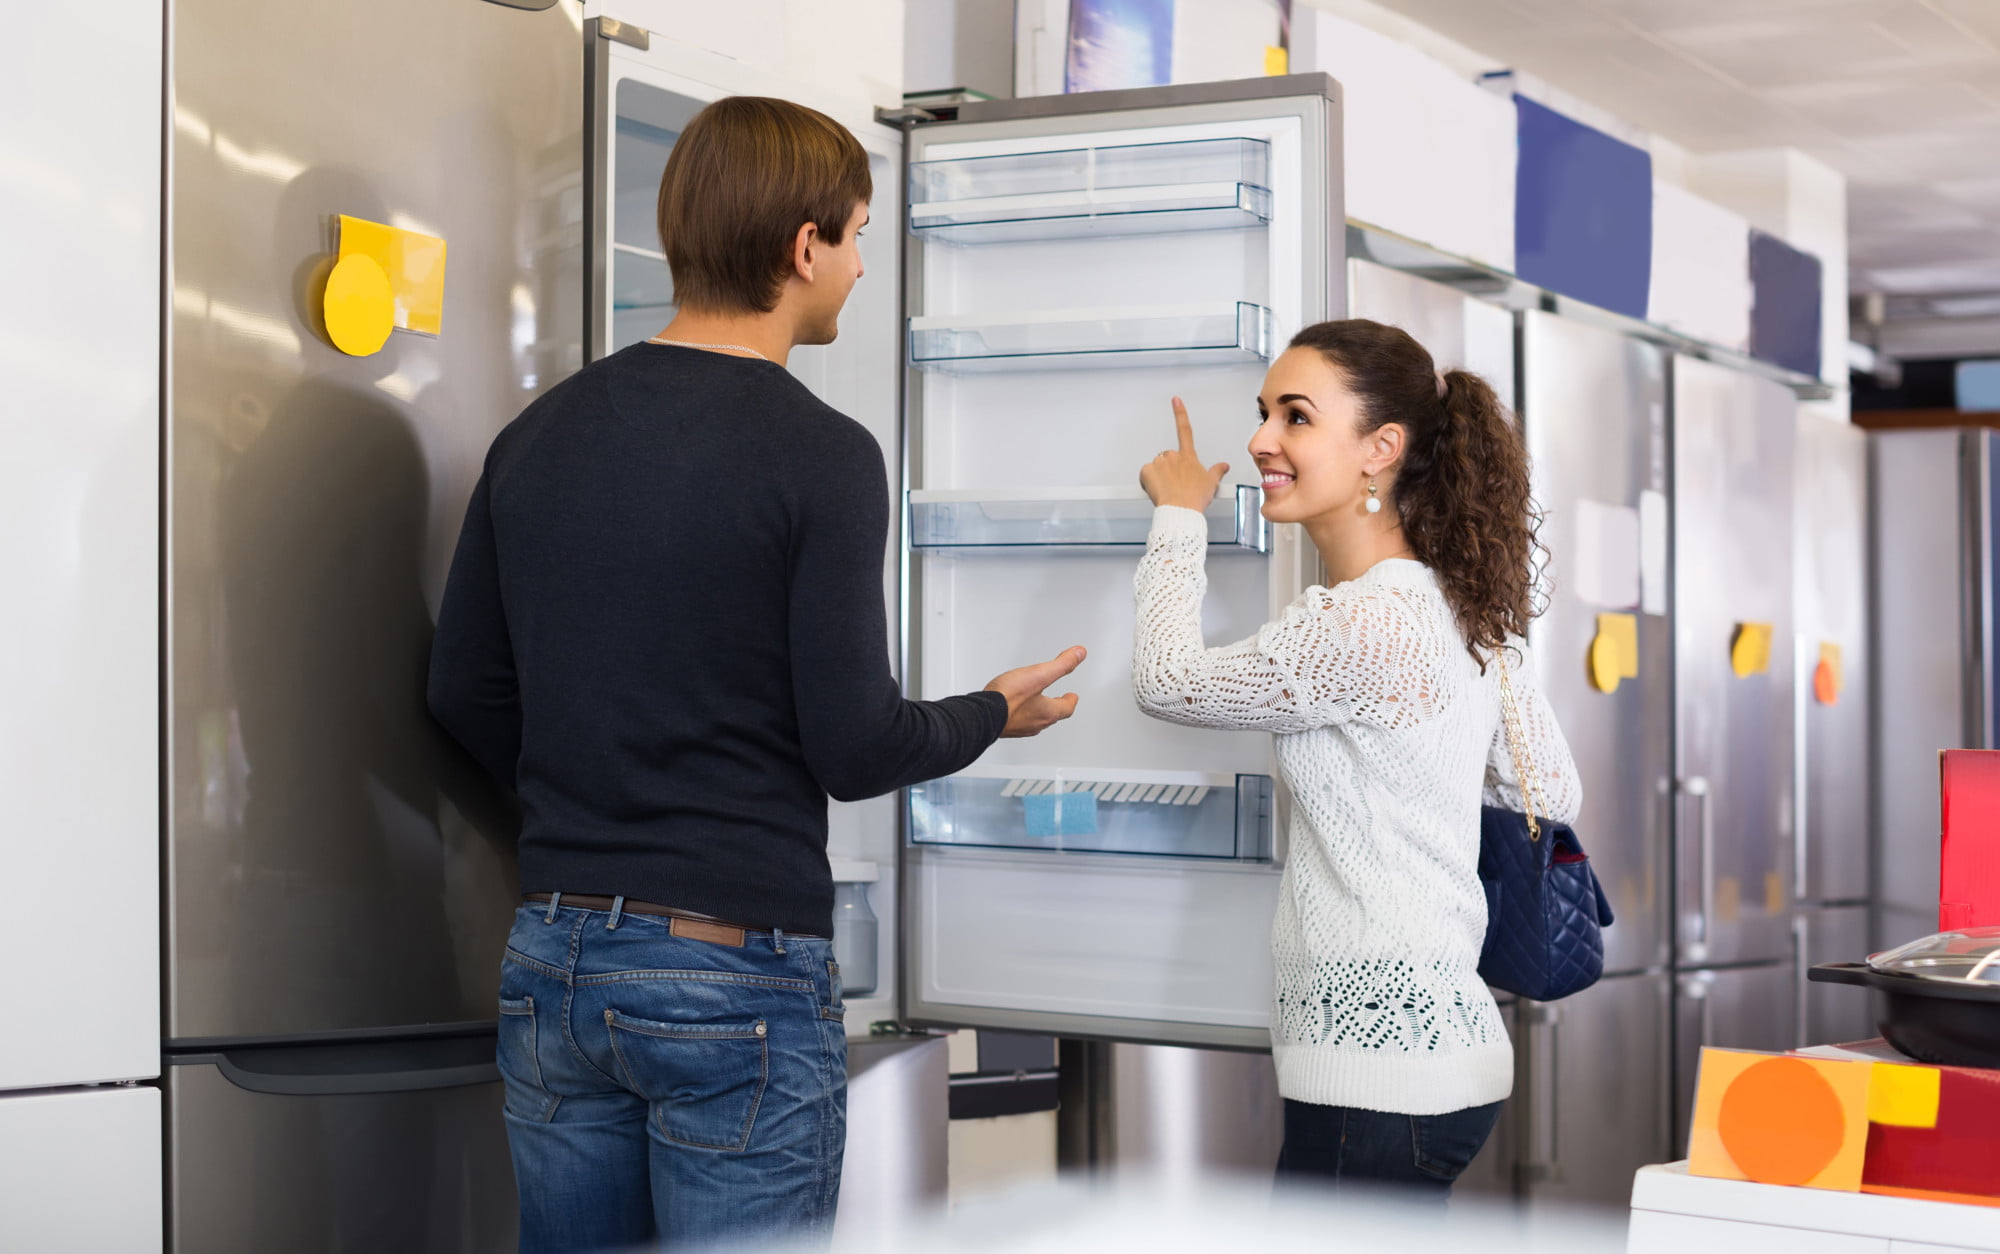 Finding the right refrigerator for your needs requires knowing what not to do. Here are common refrigerator purchasing errors and how to avoid them.